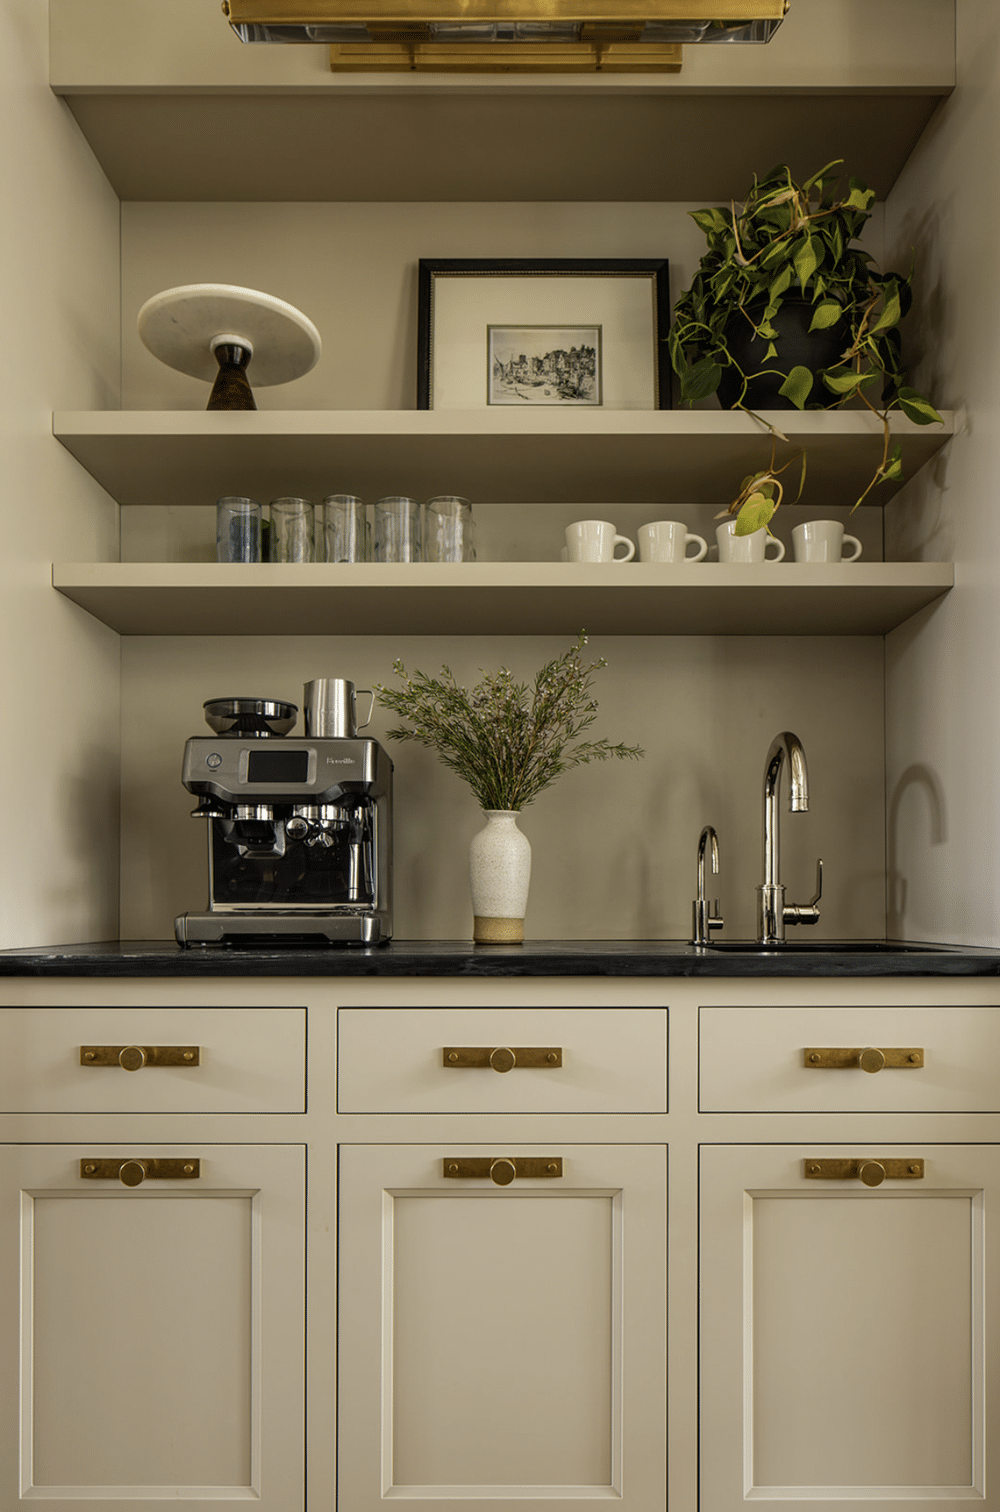 Coffee bar dreams. Shop the coffee bar accessories from #themadisongr  #mystofferhomestyle . Design @jeanstofferdesign Photo…